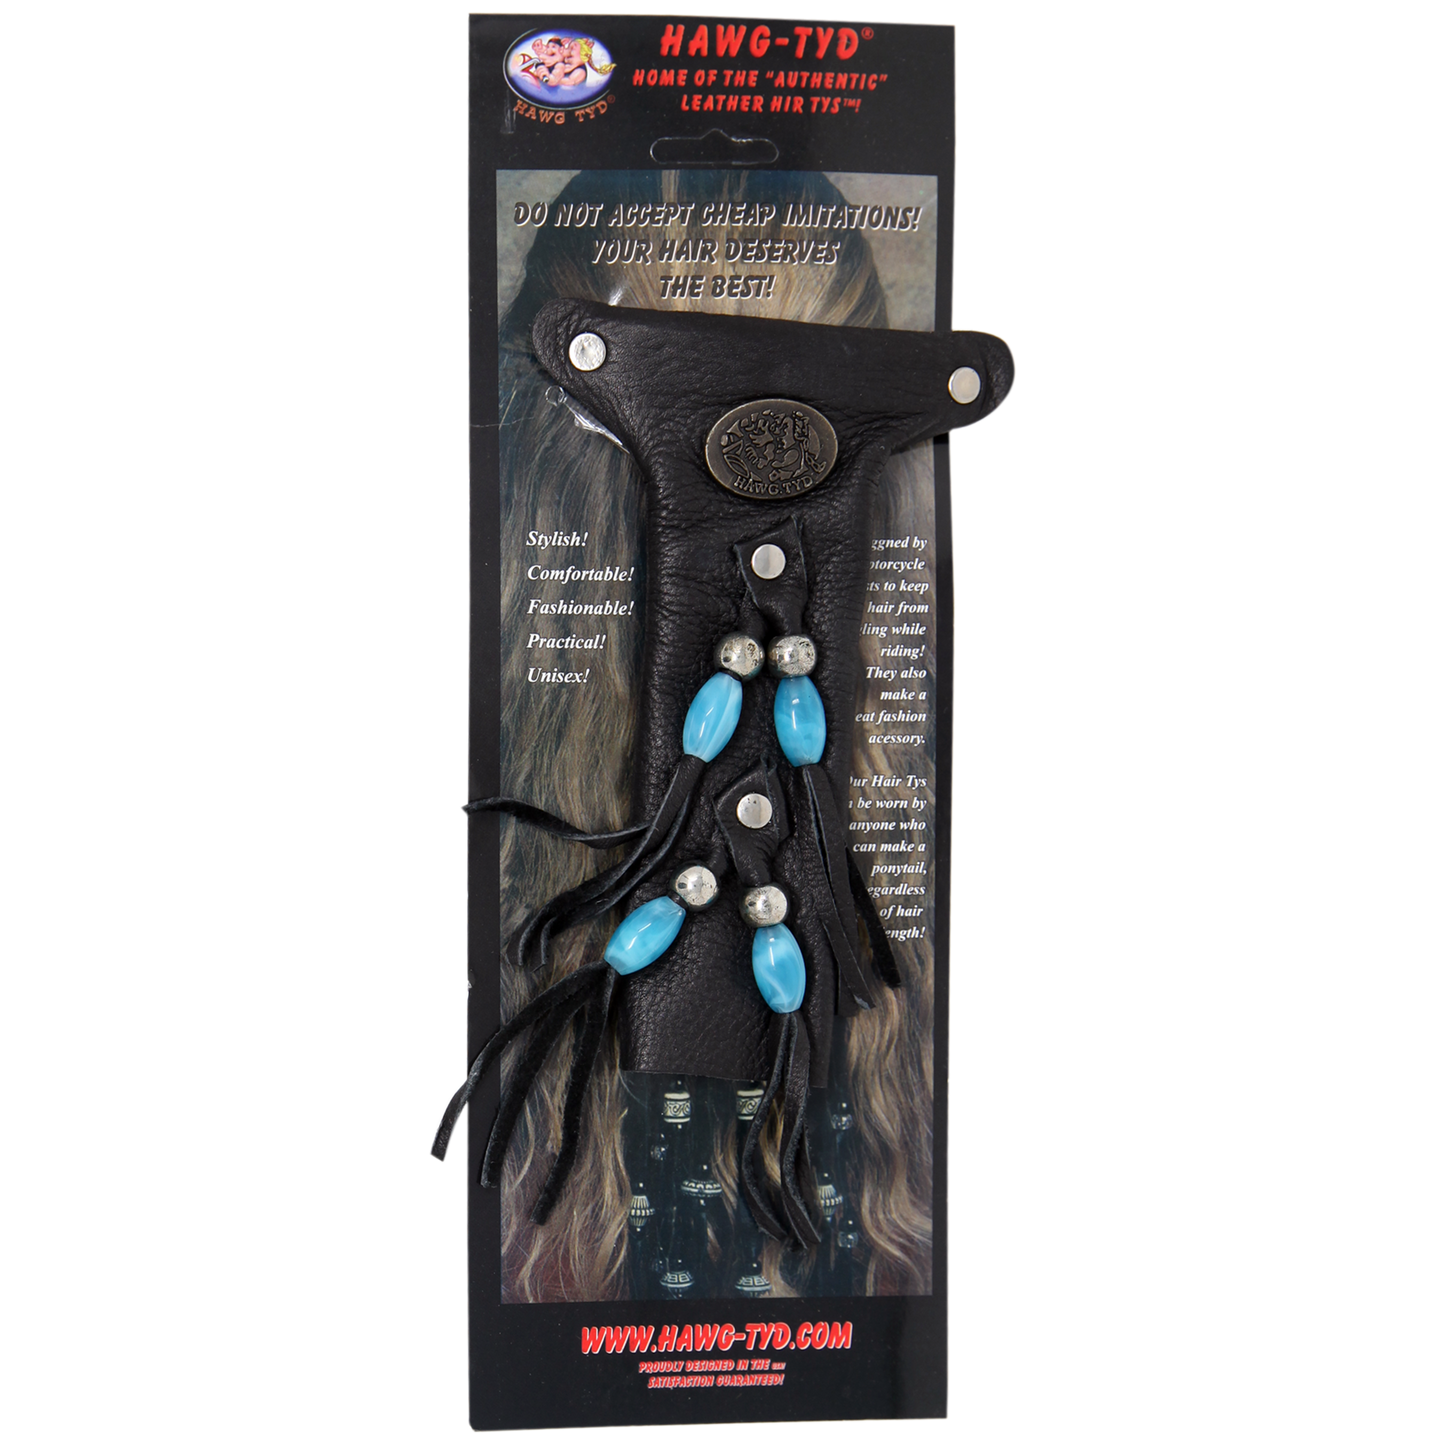 HTBlue "Hawg Tyd" The Authentic Leather Hair TYS - Blue Beads